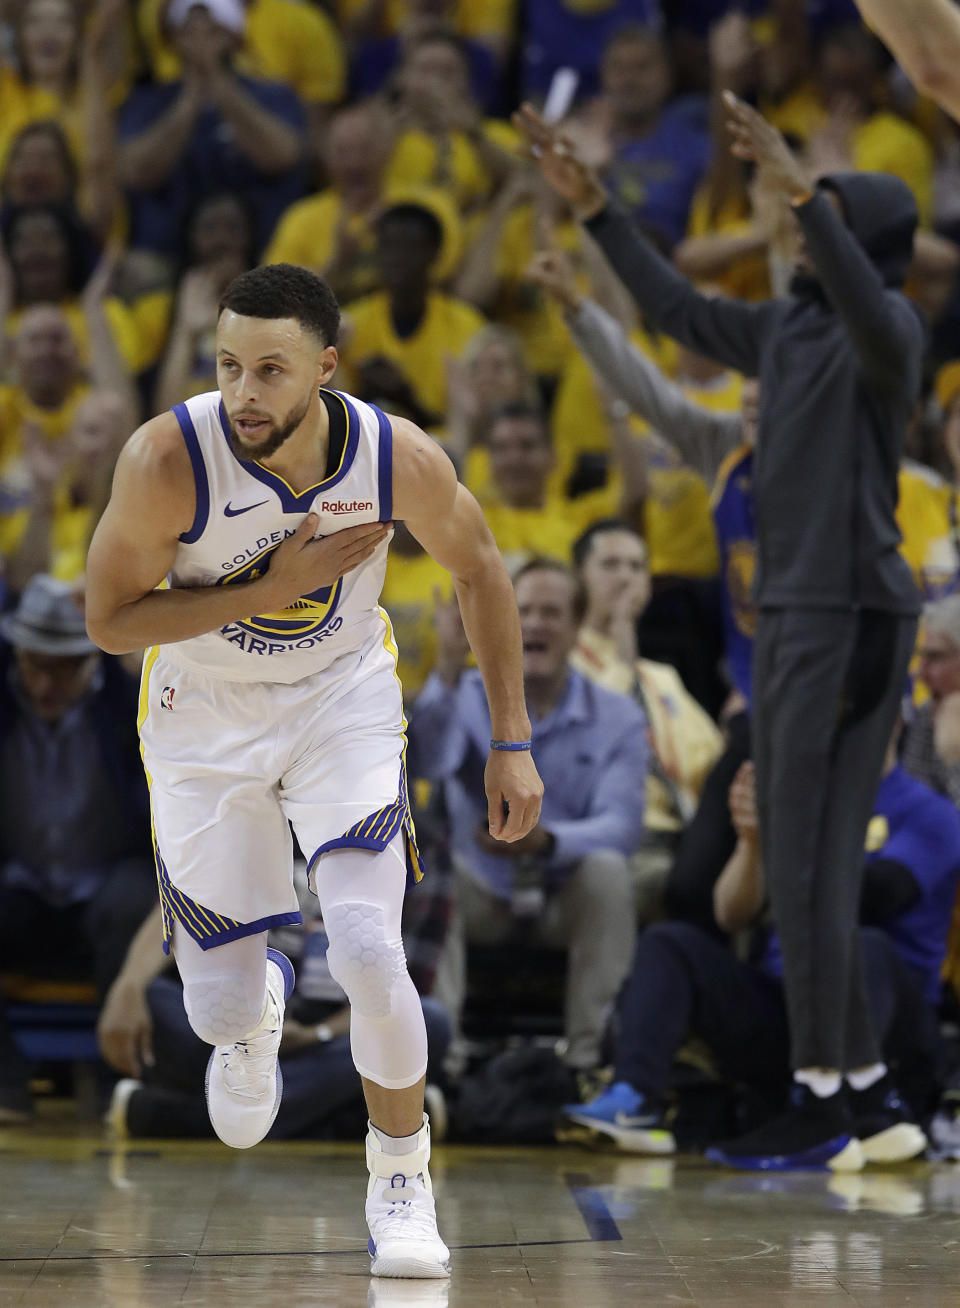 Golden State Warriors guard Stephen Curry reacts after scoring against the Houston Rockets during the first half of Game 1 of a second-round NBA basketball playoff series in Oakland, Calif., Sunday, April 28, 2019. (AP Photo/Jeff Chiu)